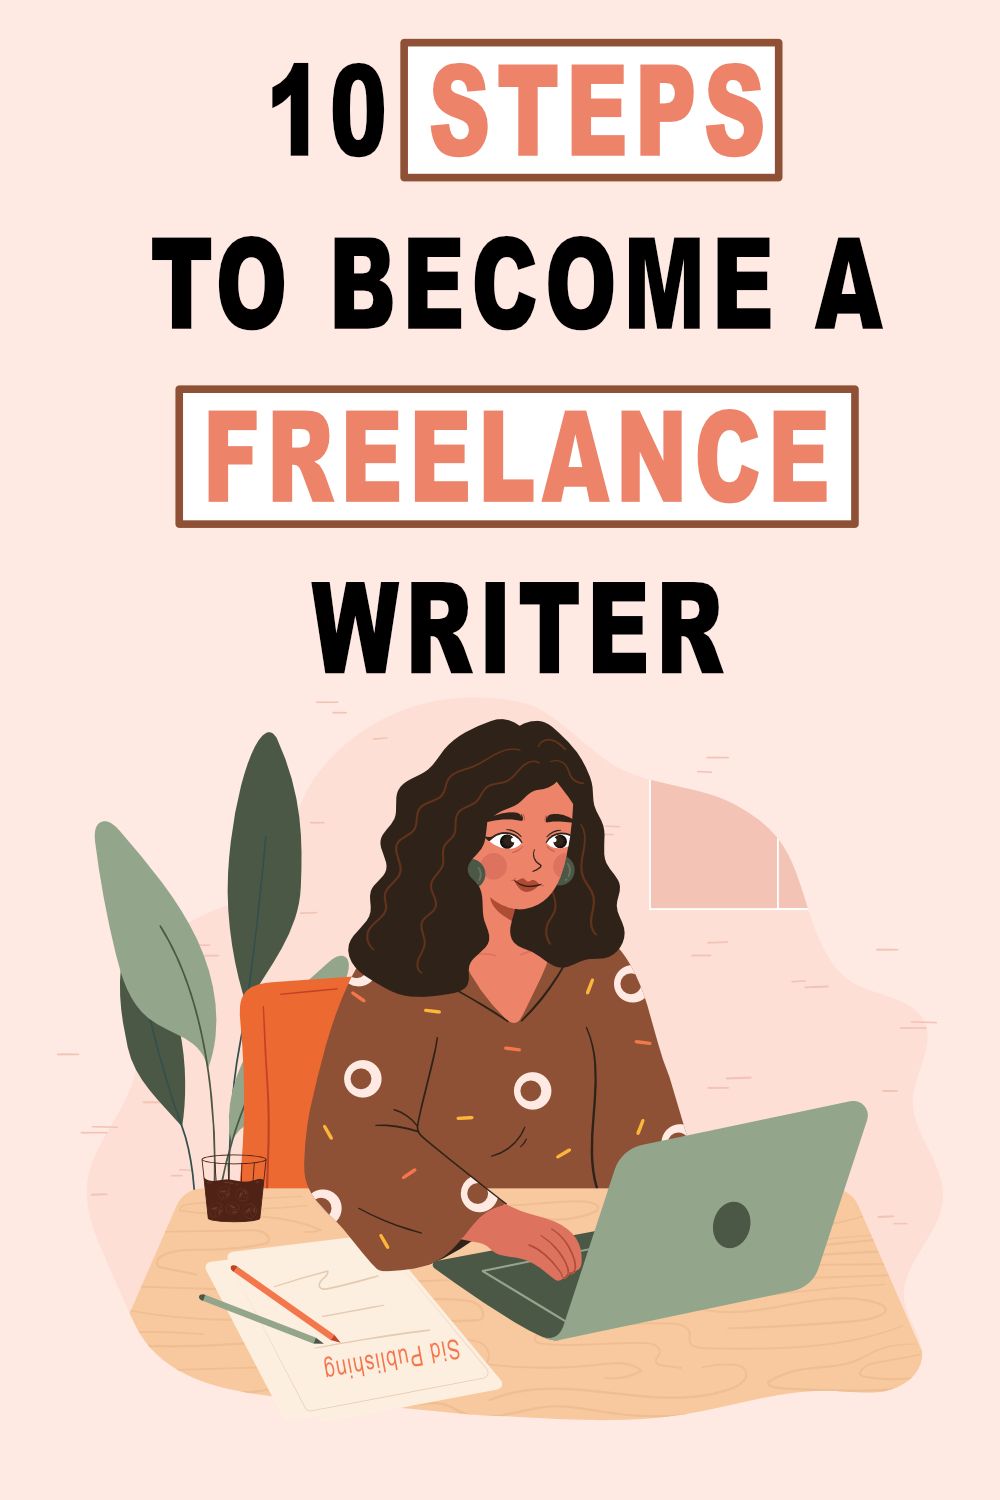 10 Steps To Become A Freelance Writer On Fiverr And Make Money (With No Experience)